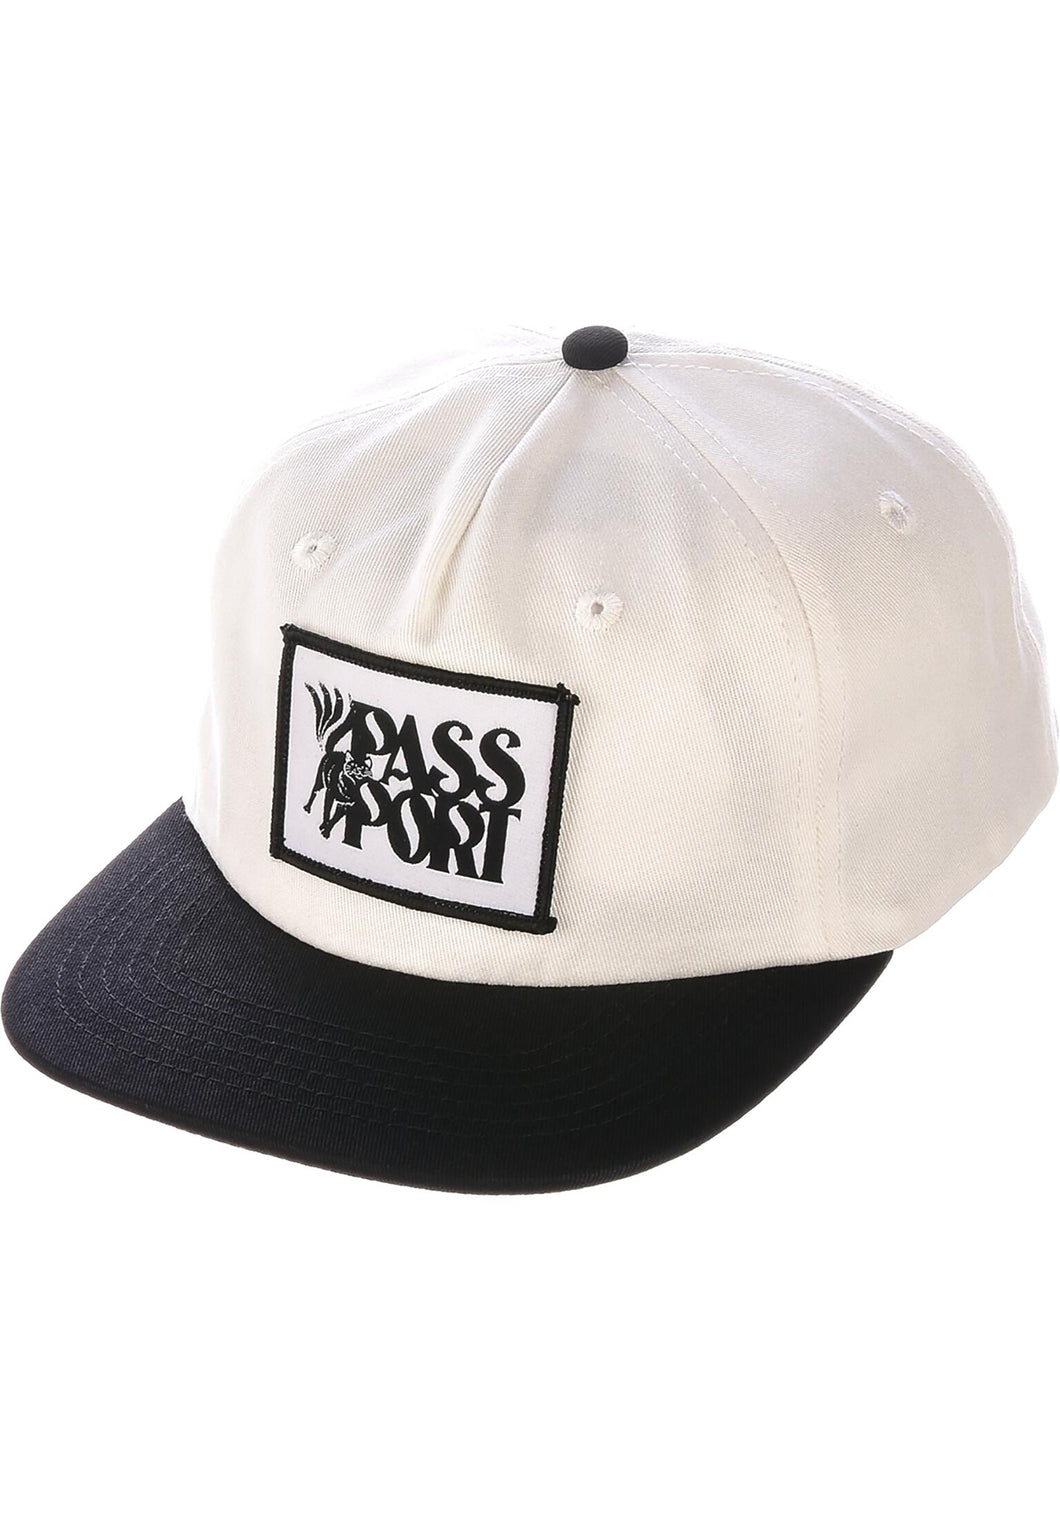 Pass-Port Moggy Patch 5 Panel - White/Black